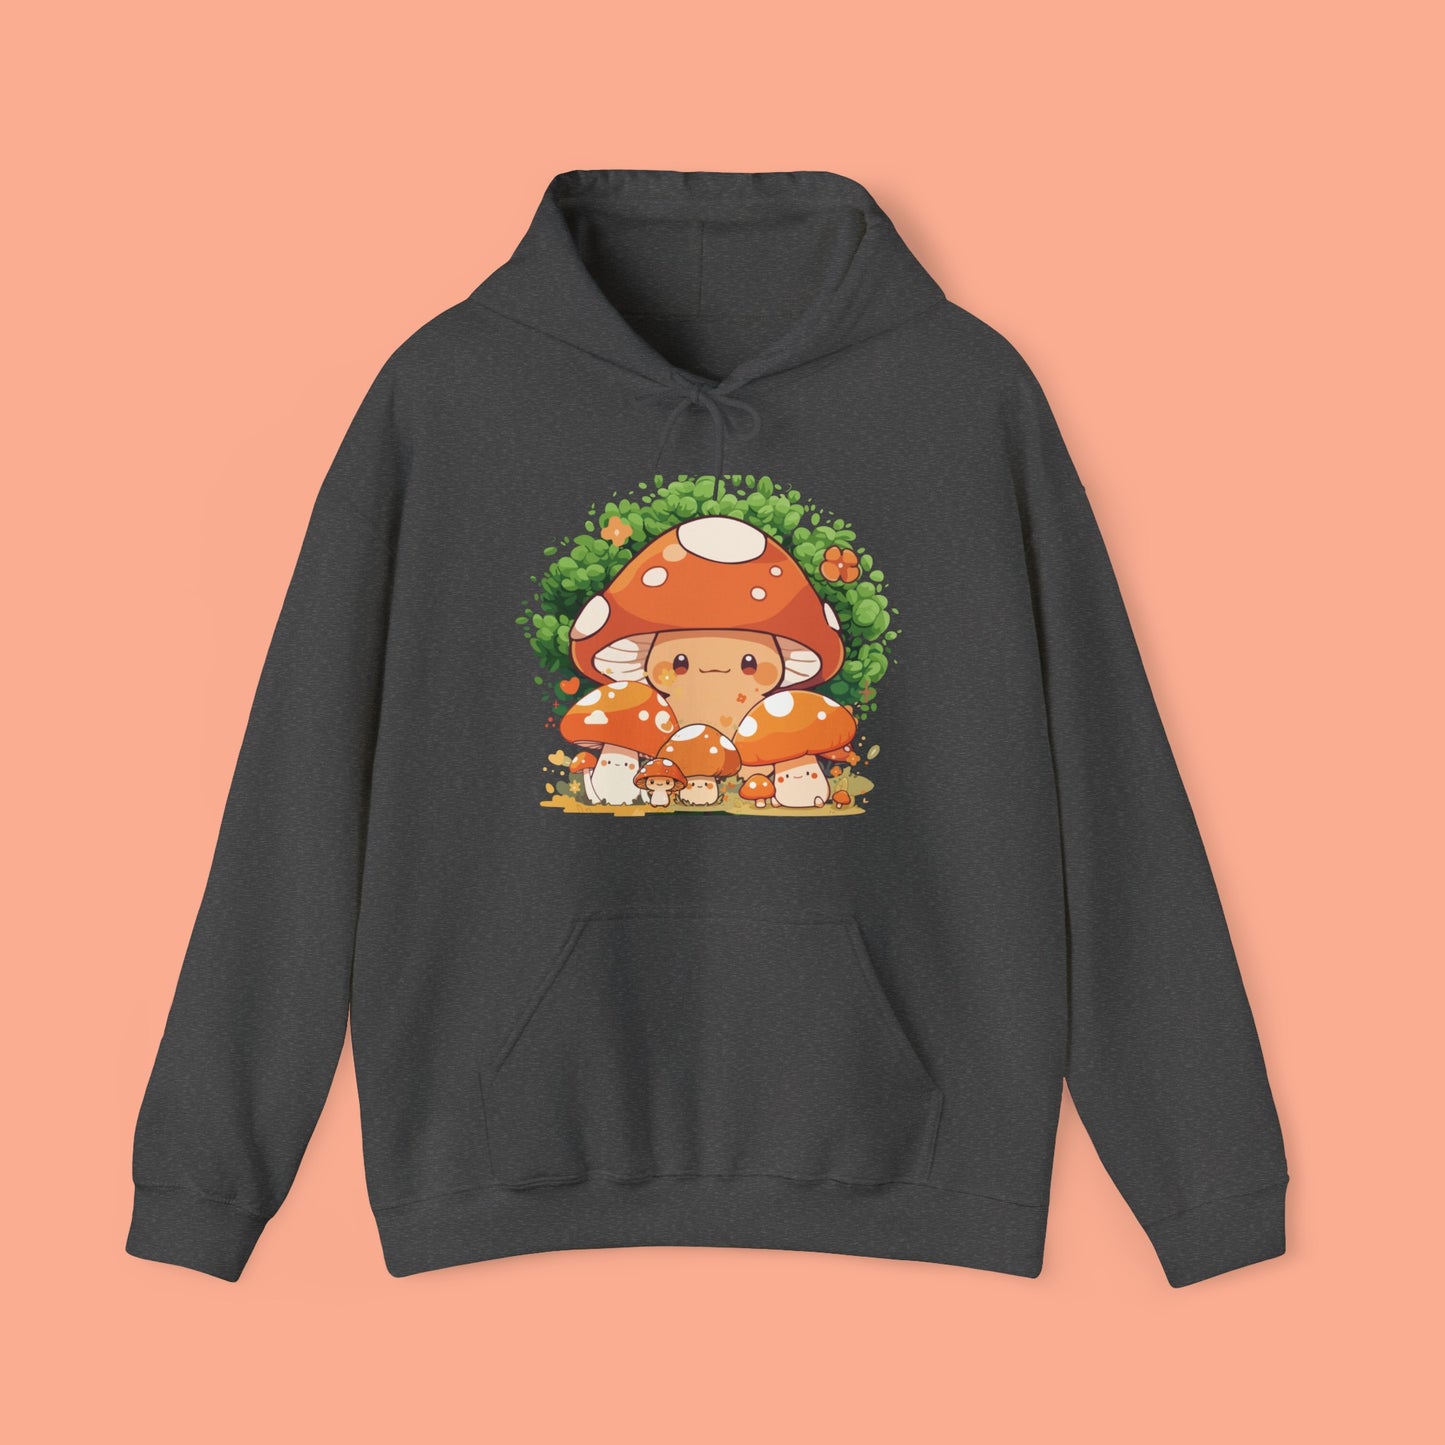 For the cute mushroom lover, a colorful celebration of the fungi on this Unisex Heavy Blend™ Hooded Sweatshirt